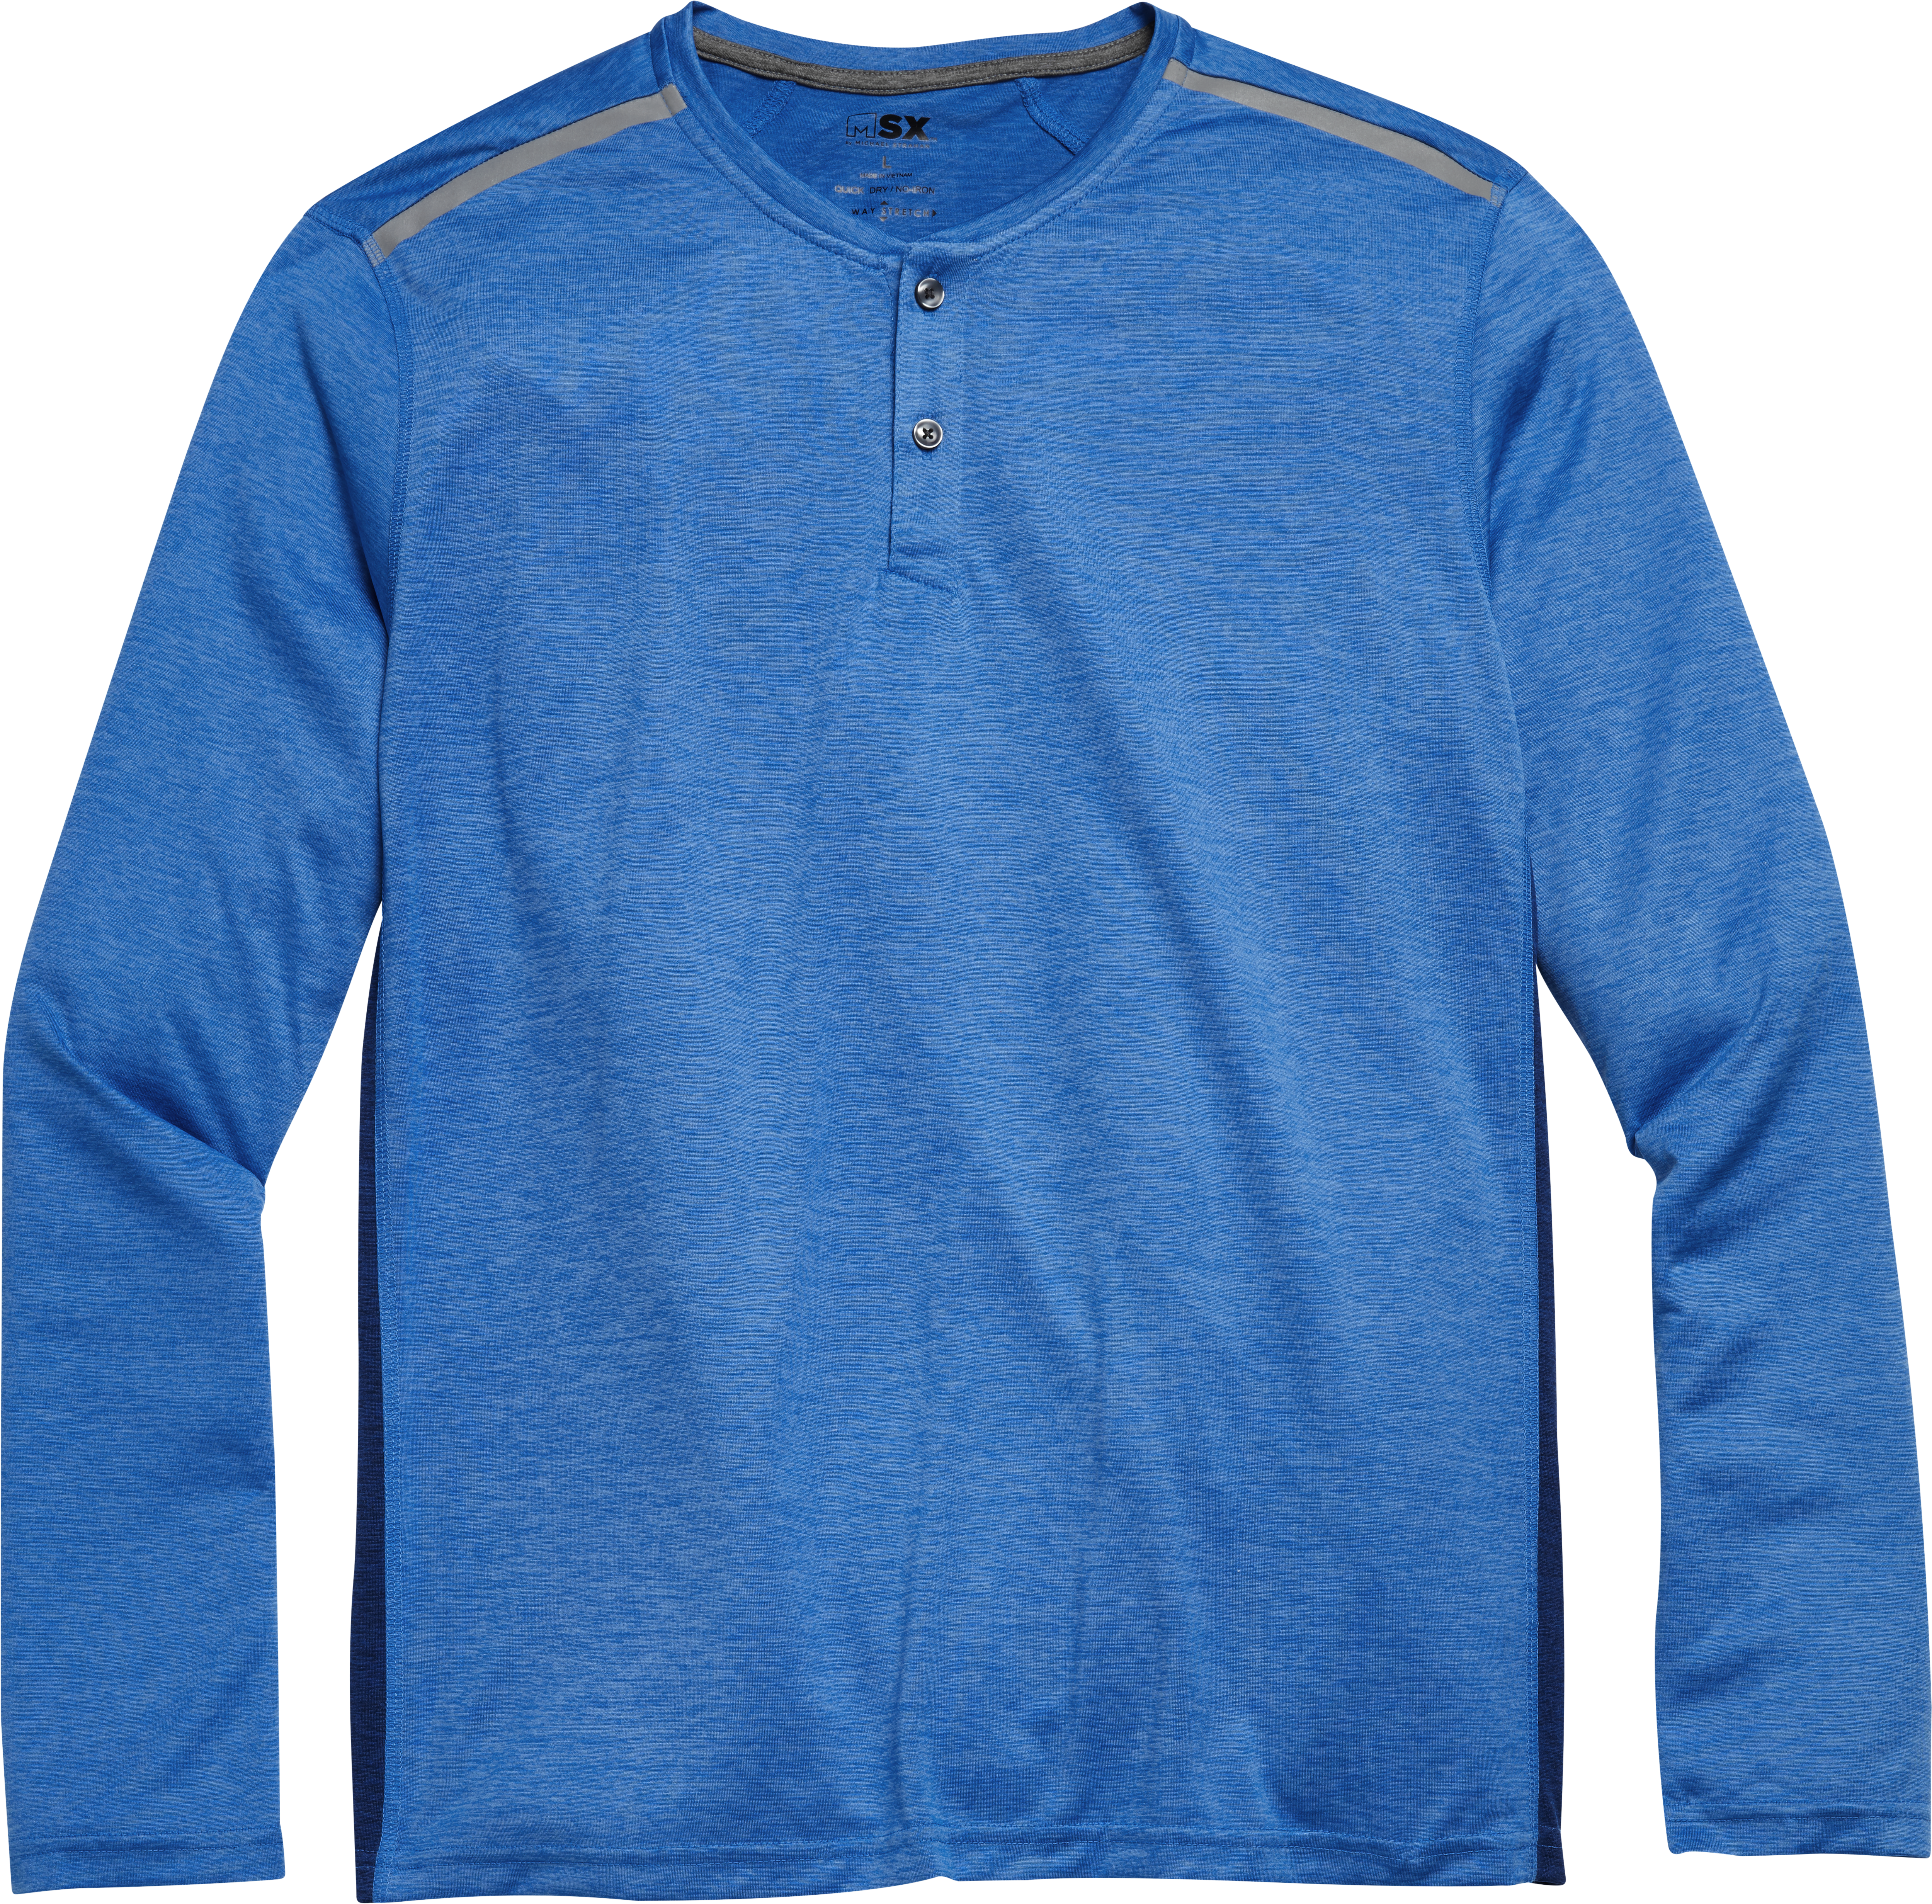 MSX by Michael Strahan Modern Fit Henley, Blue Heather - Men's Active ...